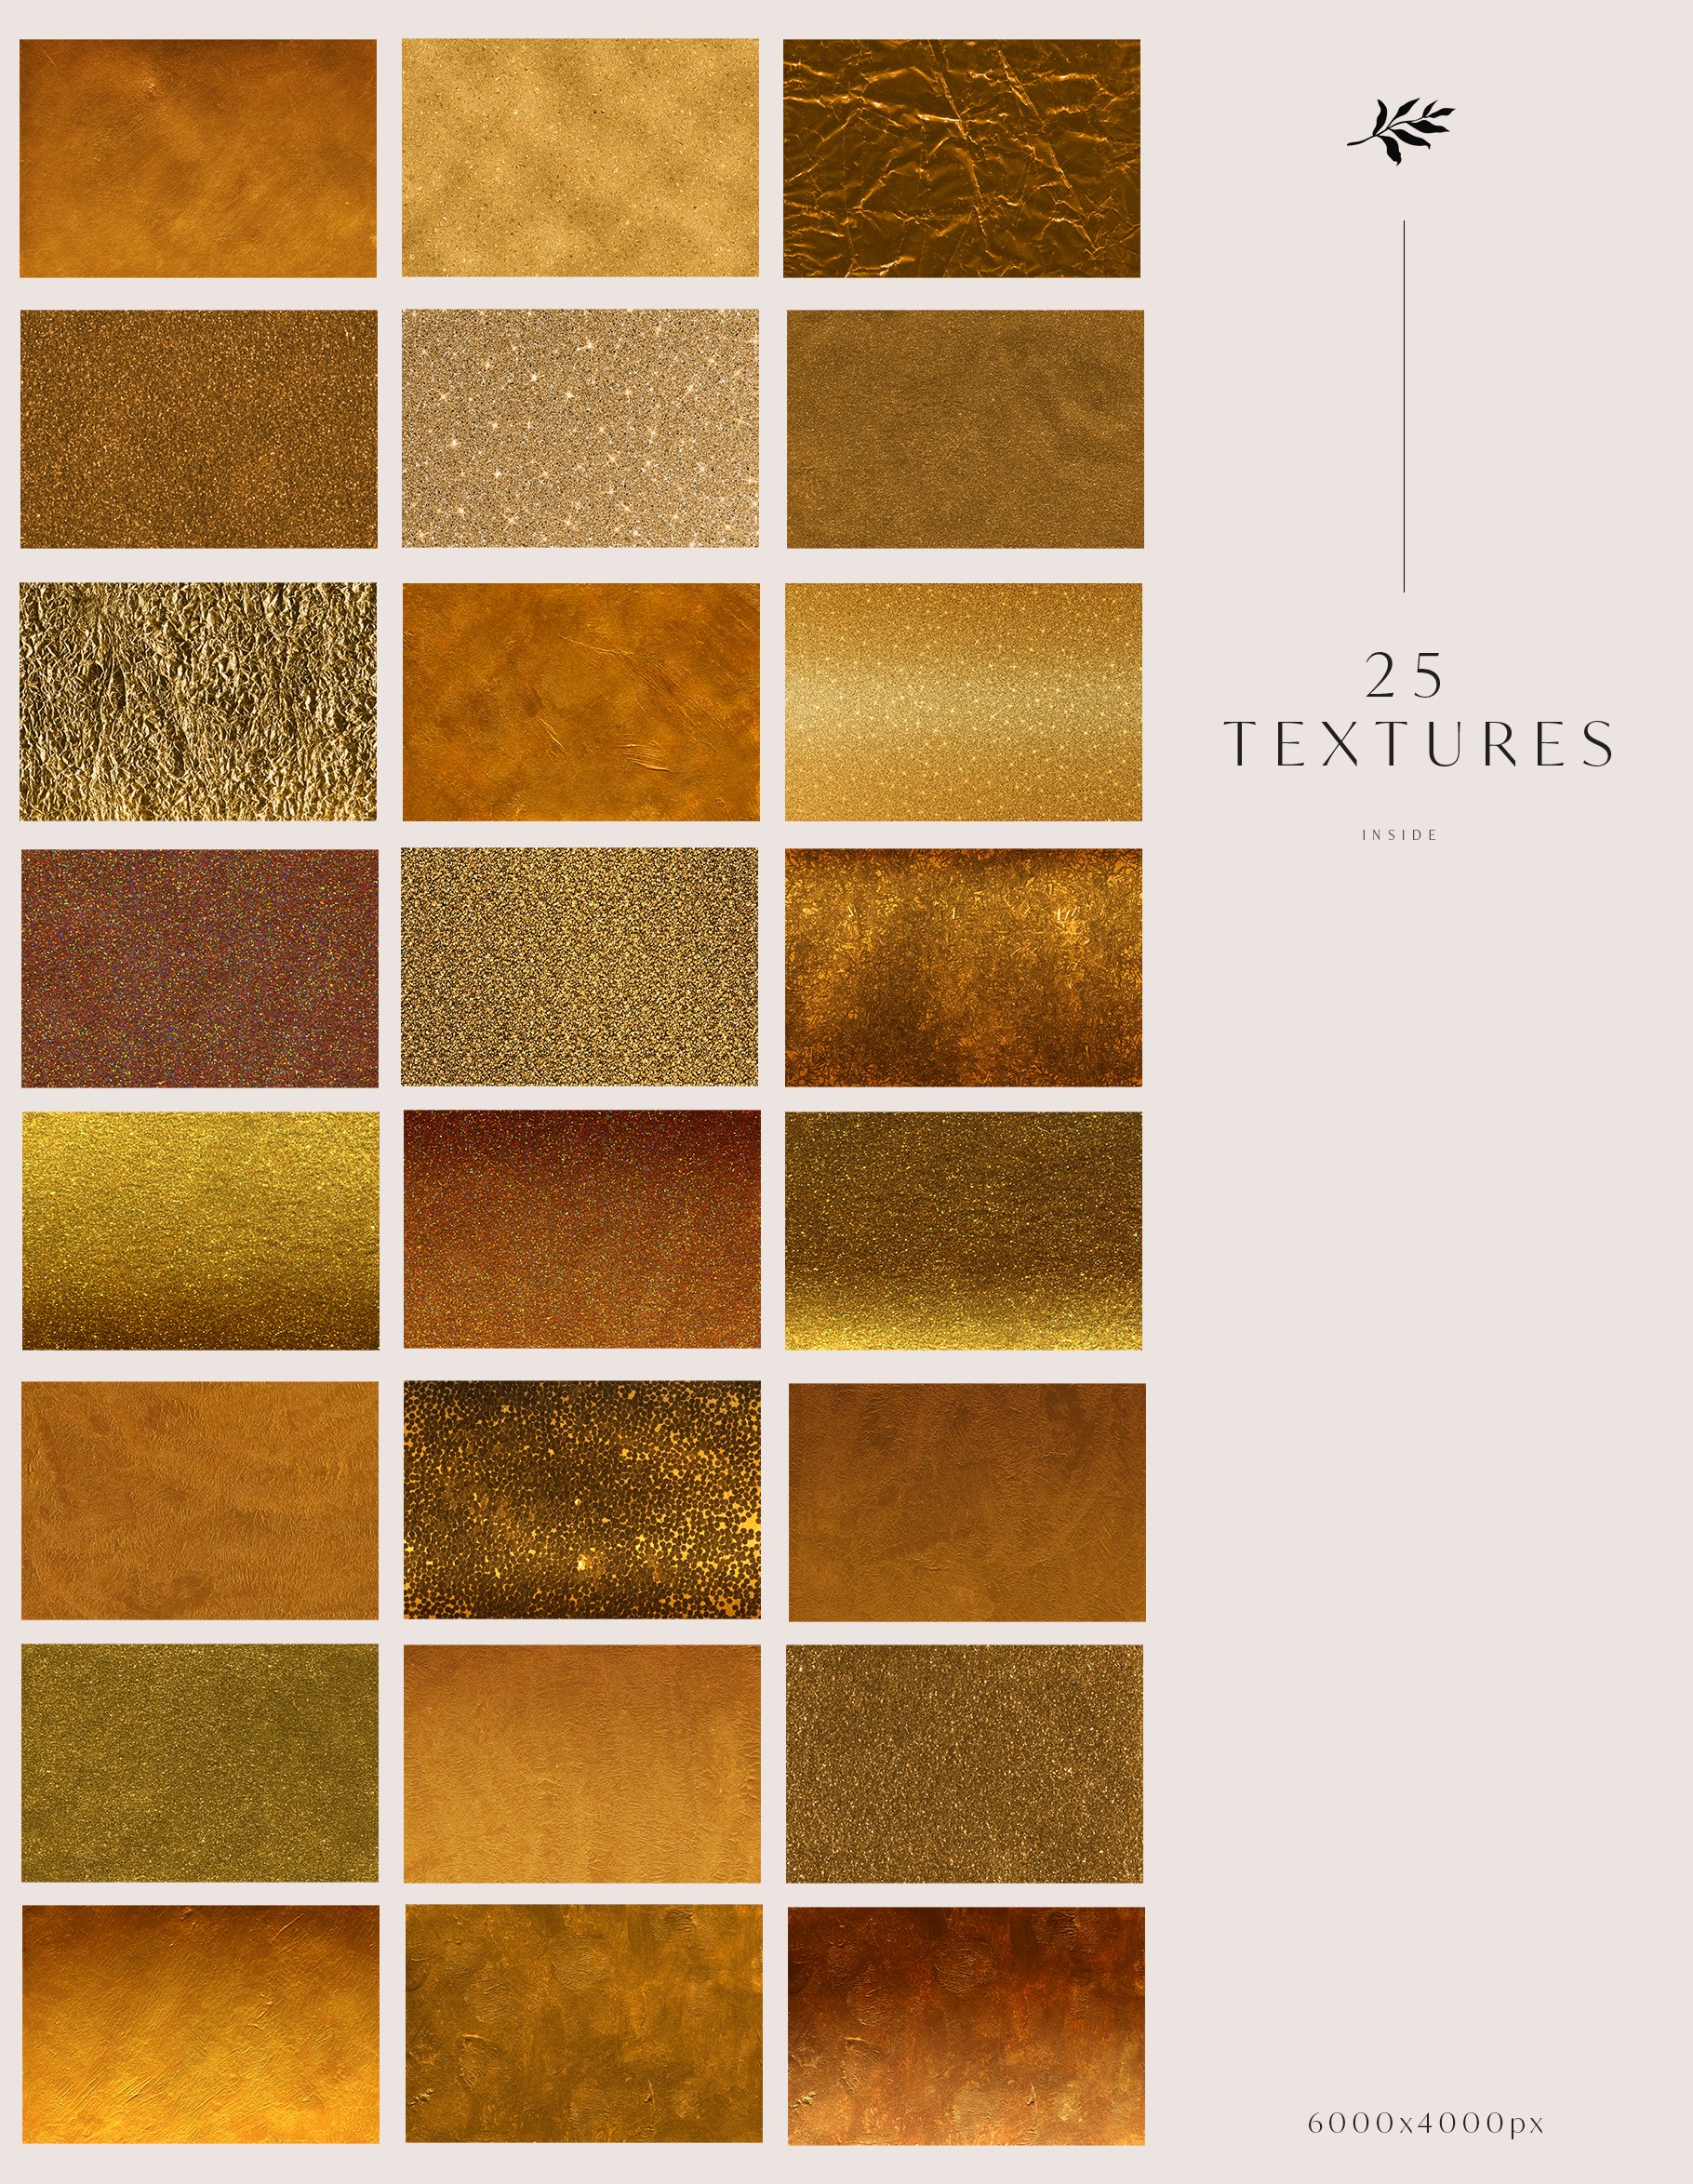 Collection includes 25 textures.